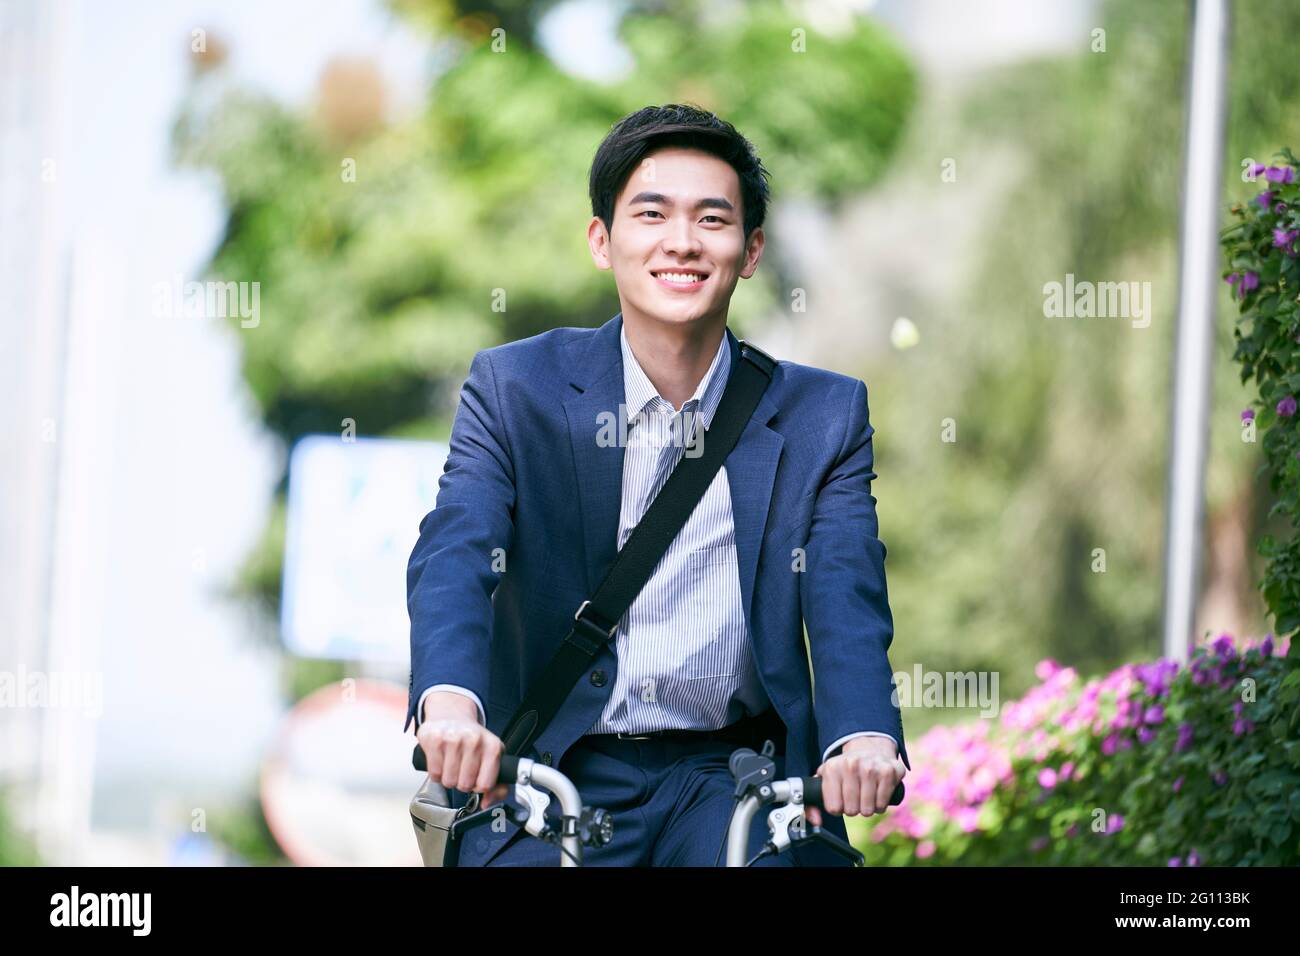 young asian business executive commuting by bike happy and smiling Stock Photo